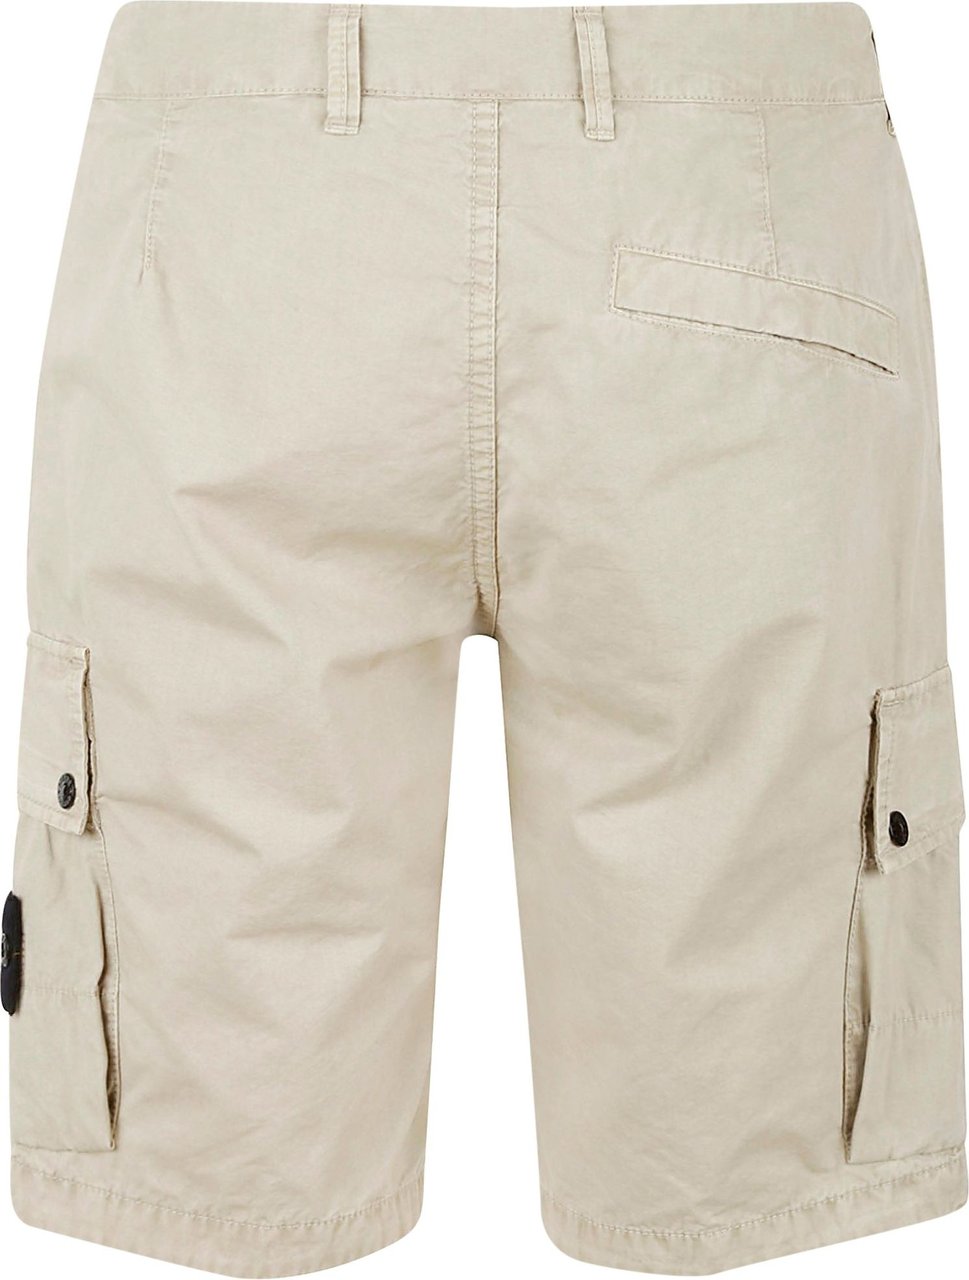 Stone Island Shorts Sand Divers Divers